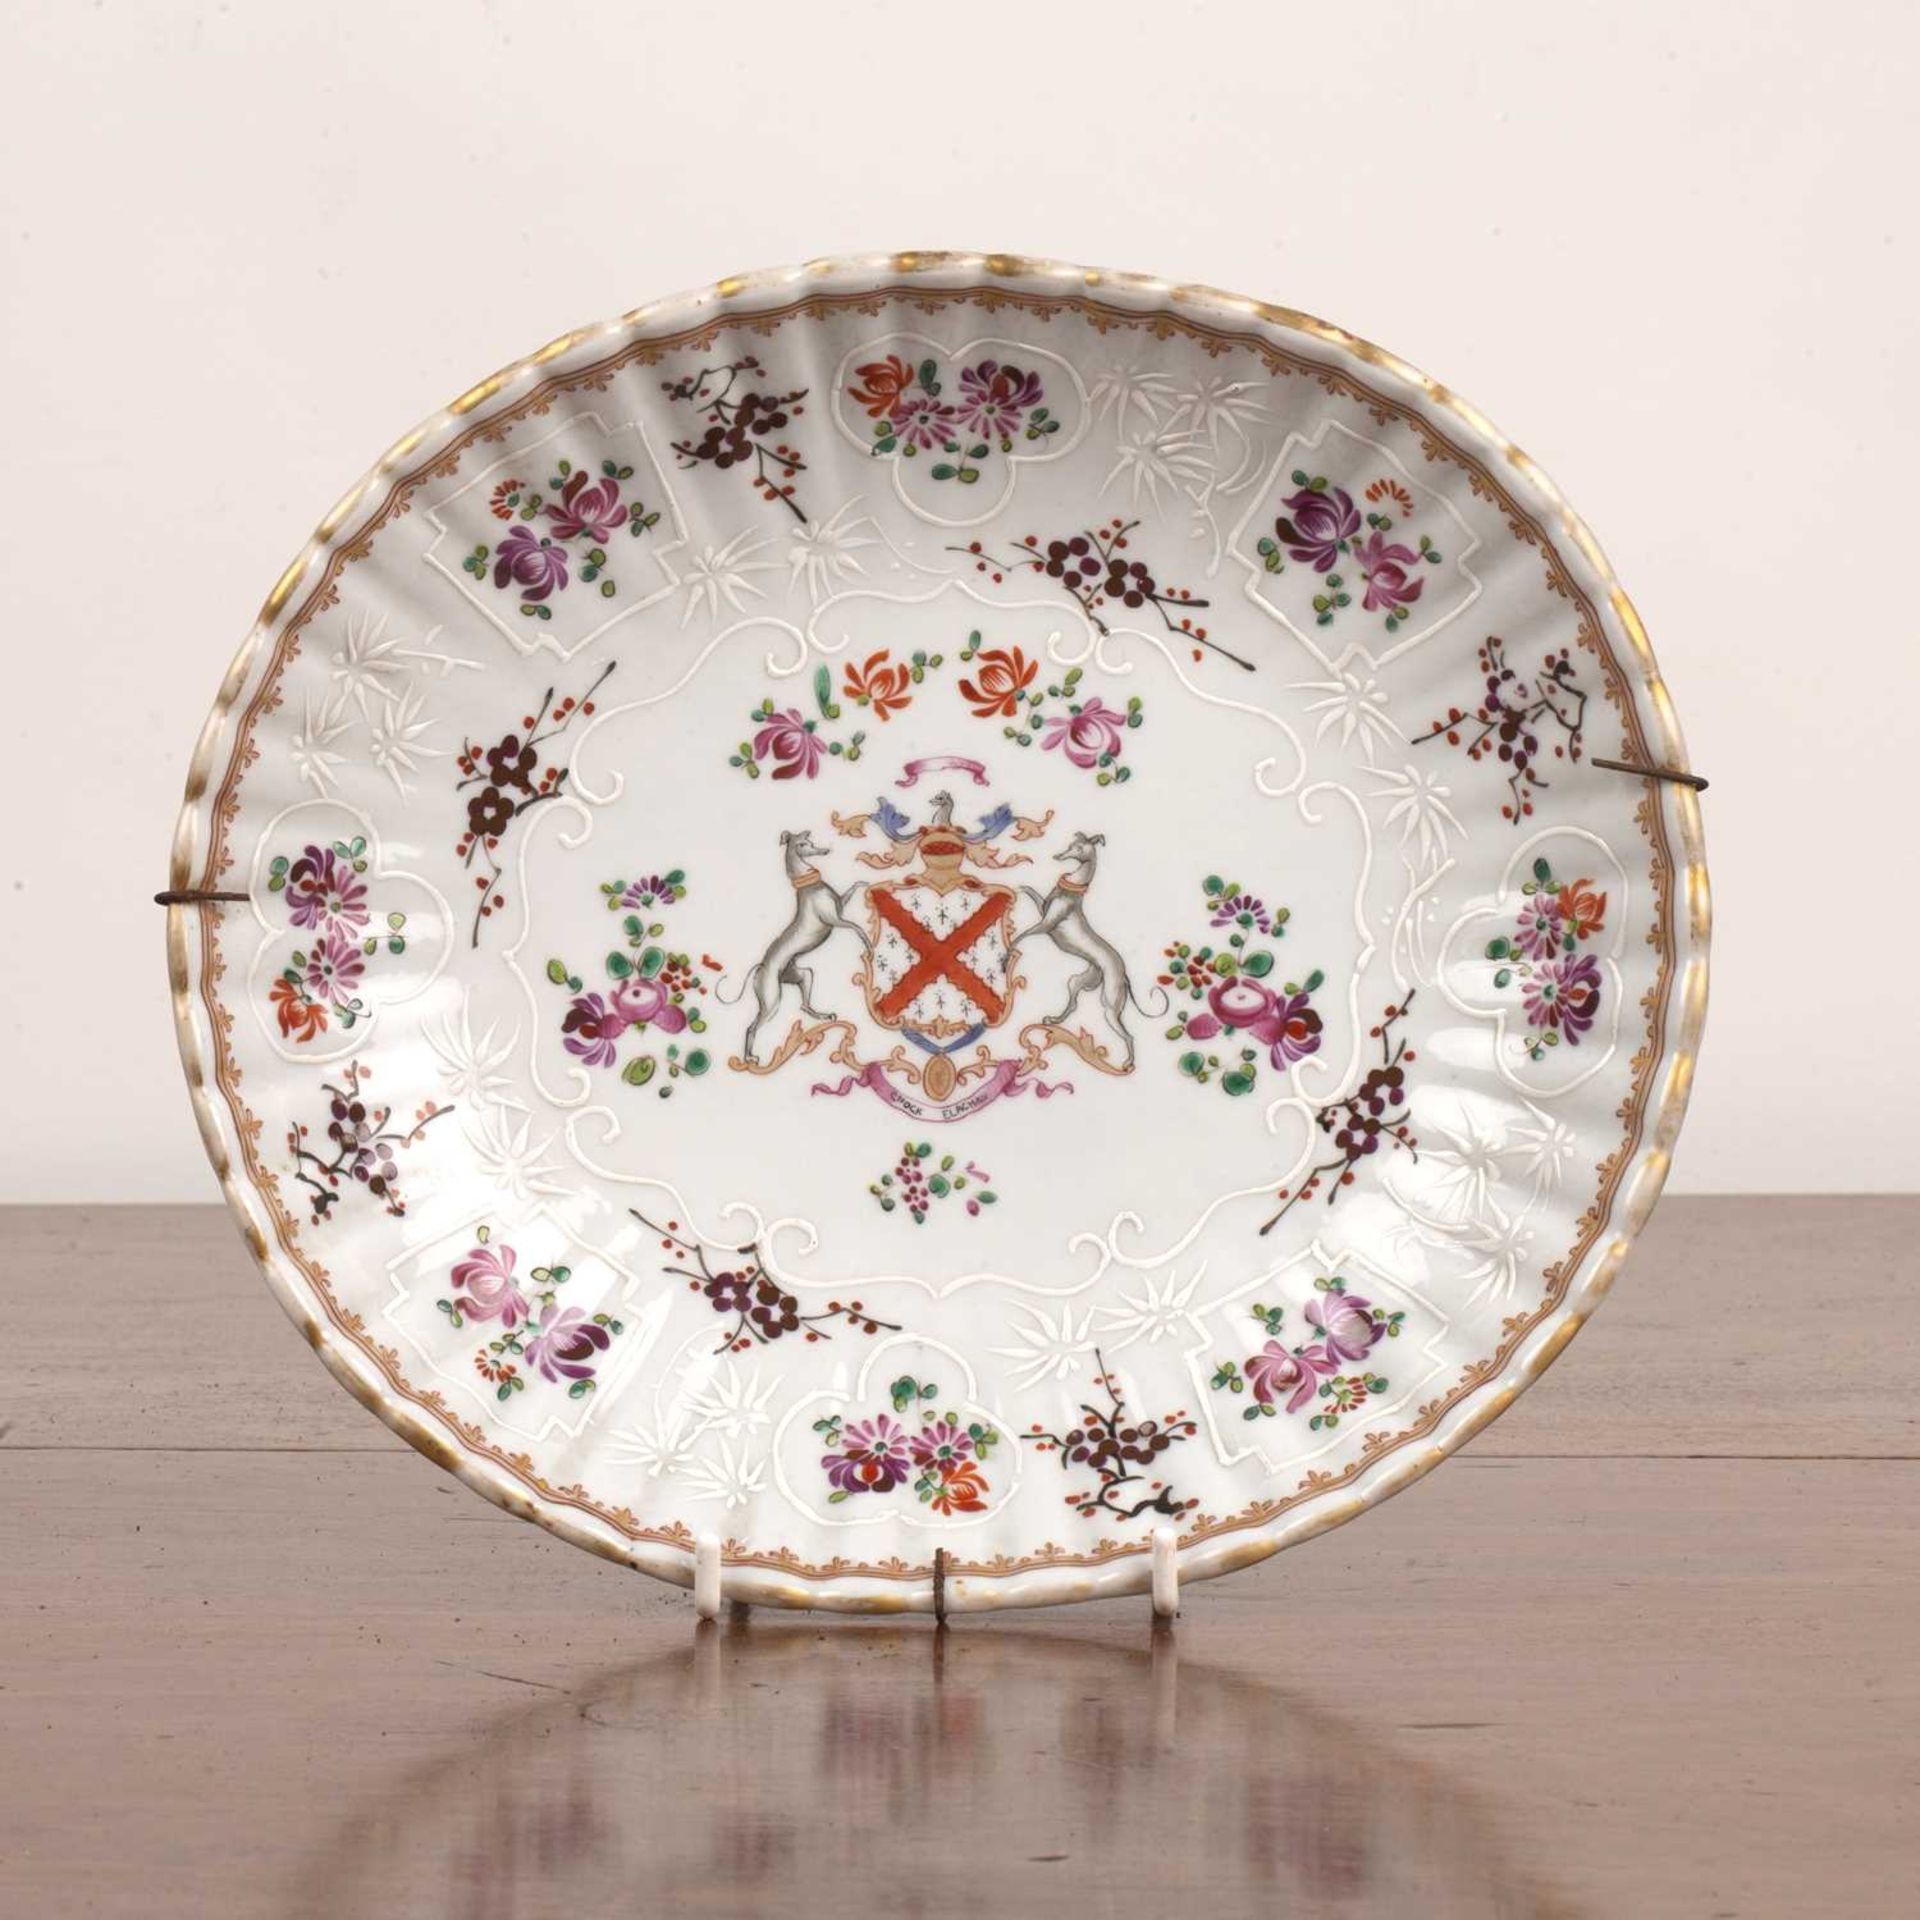 Samson porcelain Armorial plate painted in the famille rose palette with central coat of arms,